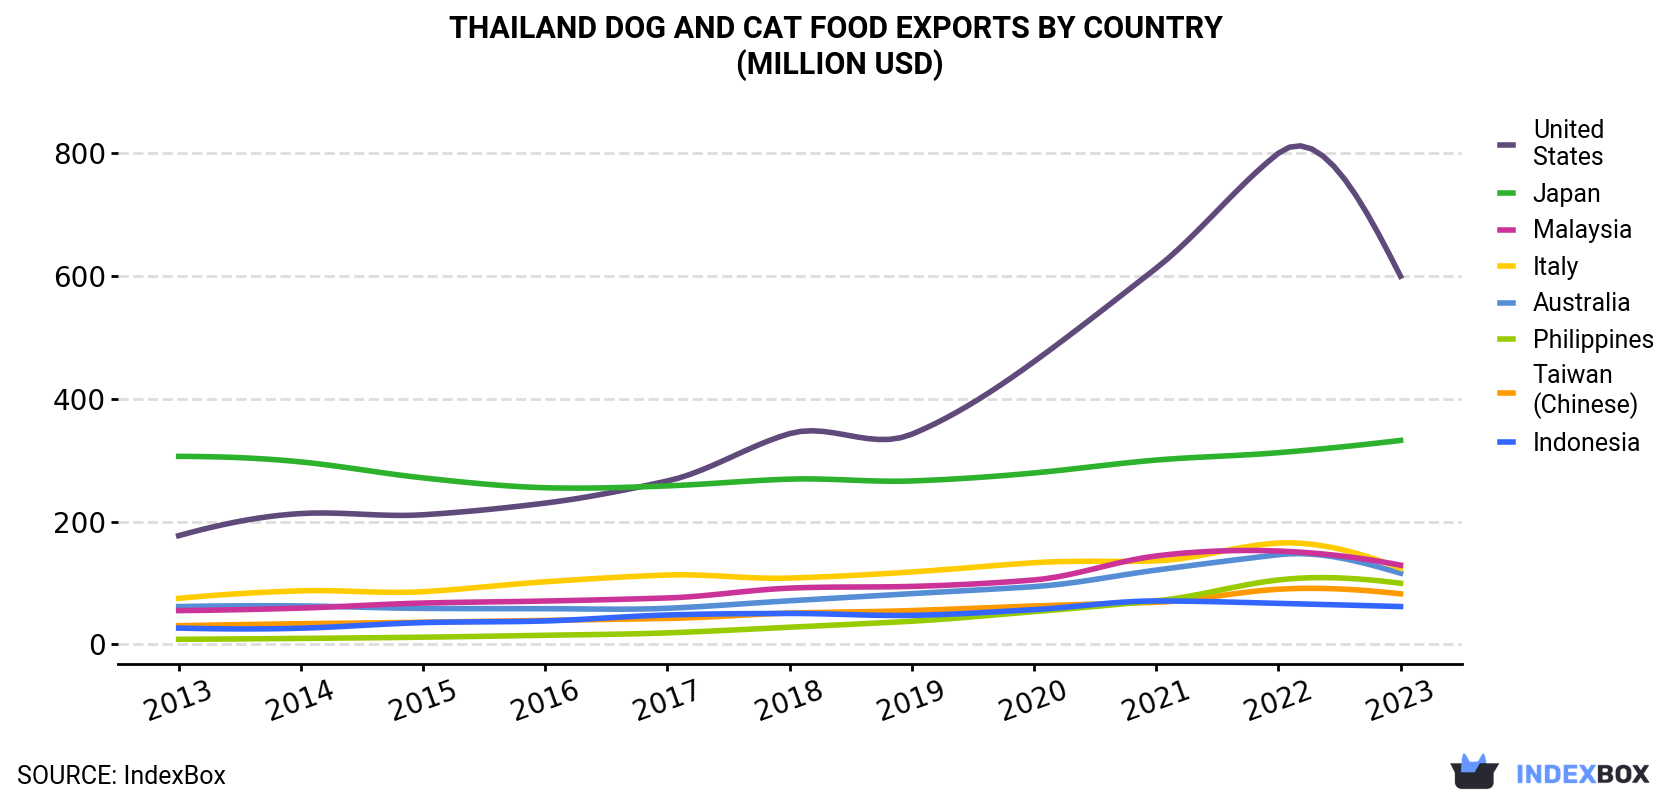 Thailand Dog And Cat Food Exports By Country (Million USD)